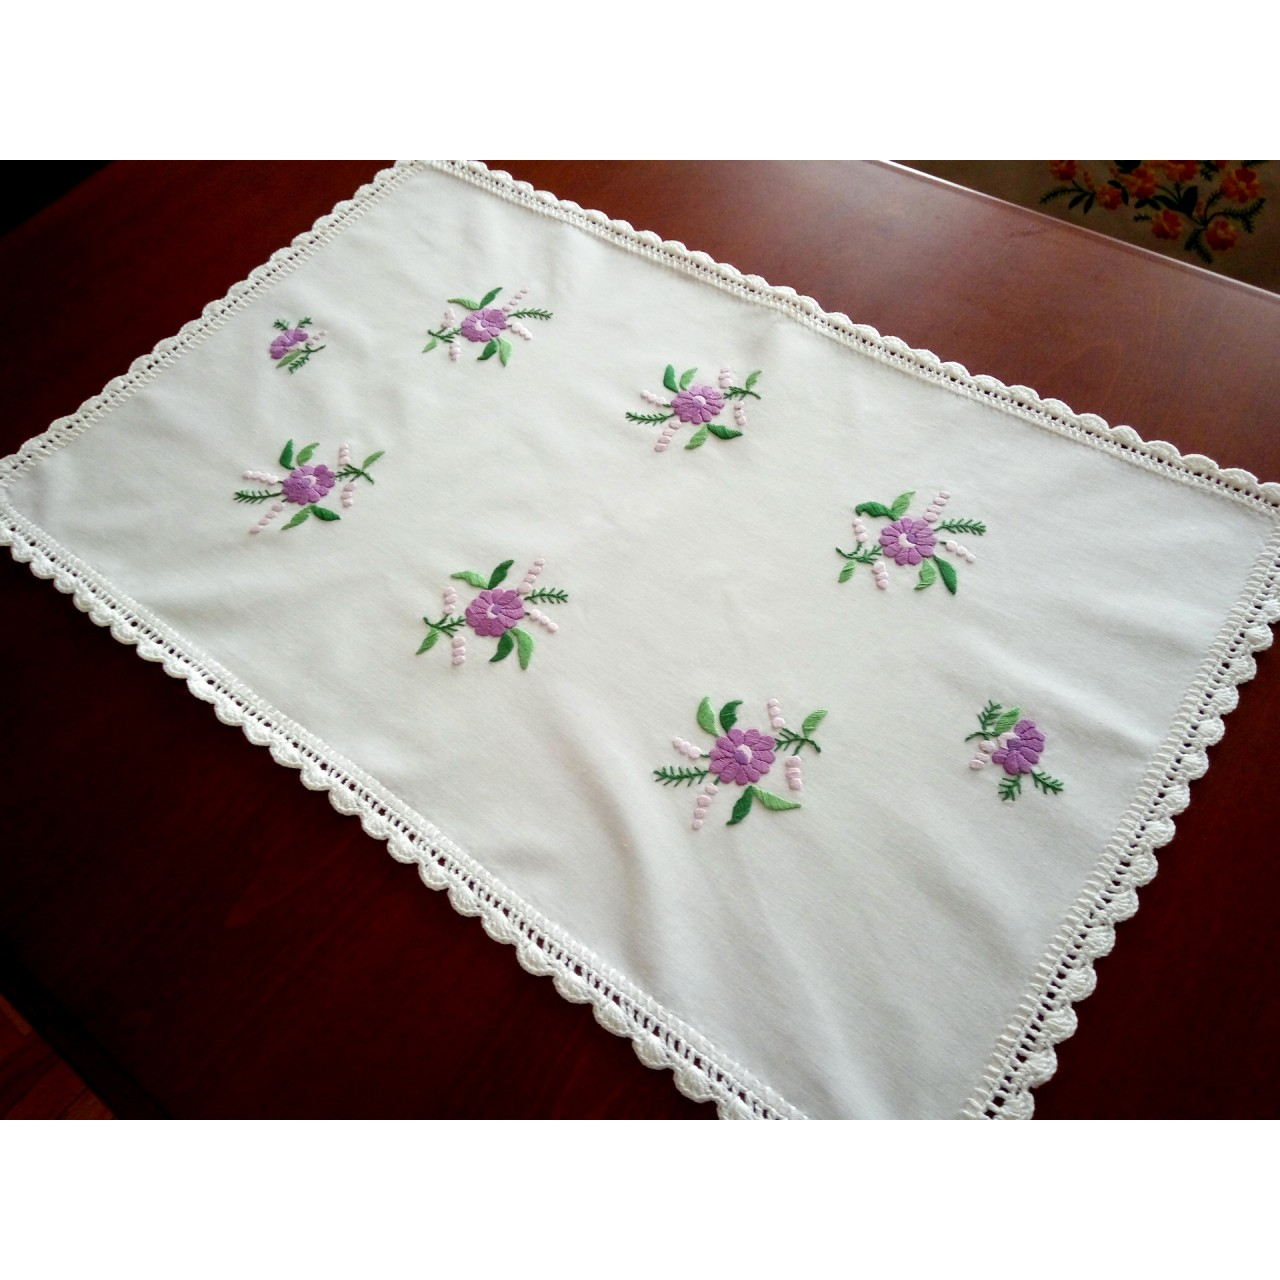 Hand Embroidery Patterns For Tablecloth Table Runner With Flower Motives Hand Embroidered Tablecloth